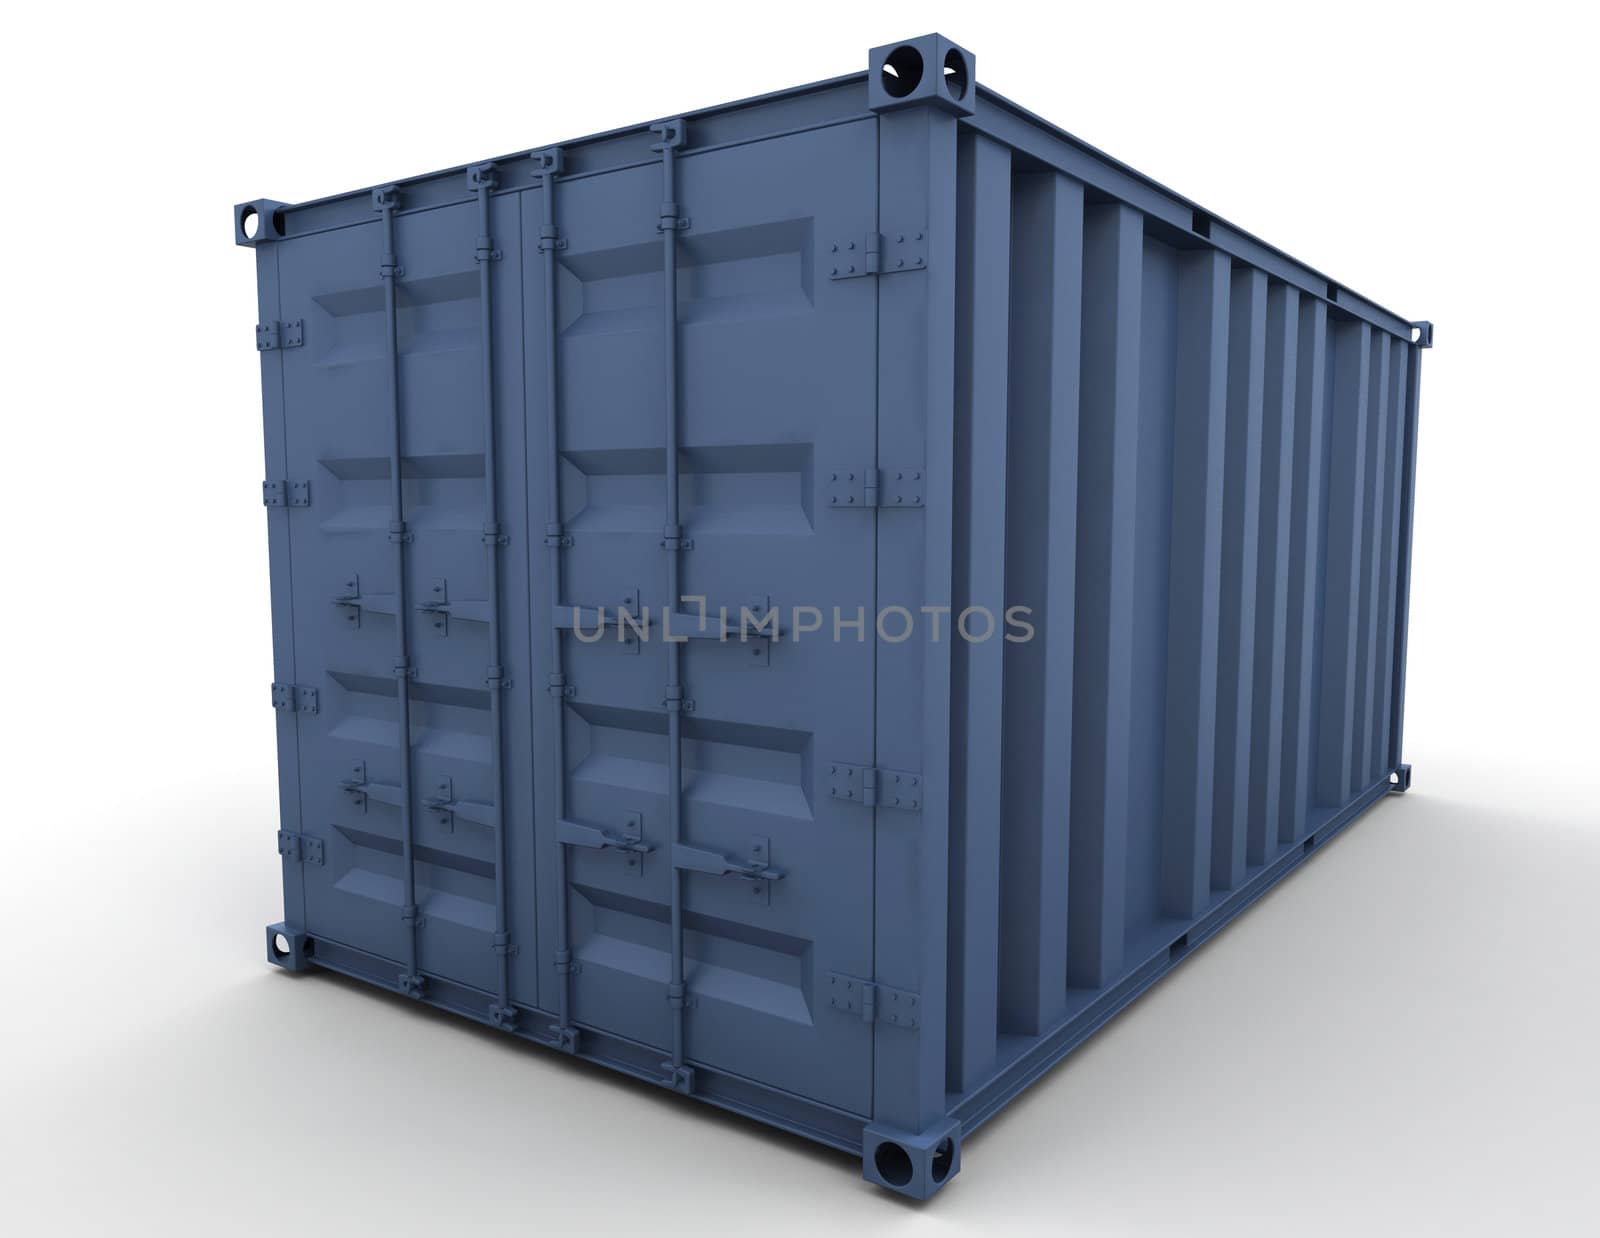 Freight container by kjpargeter